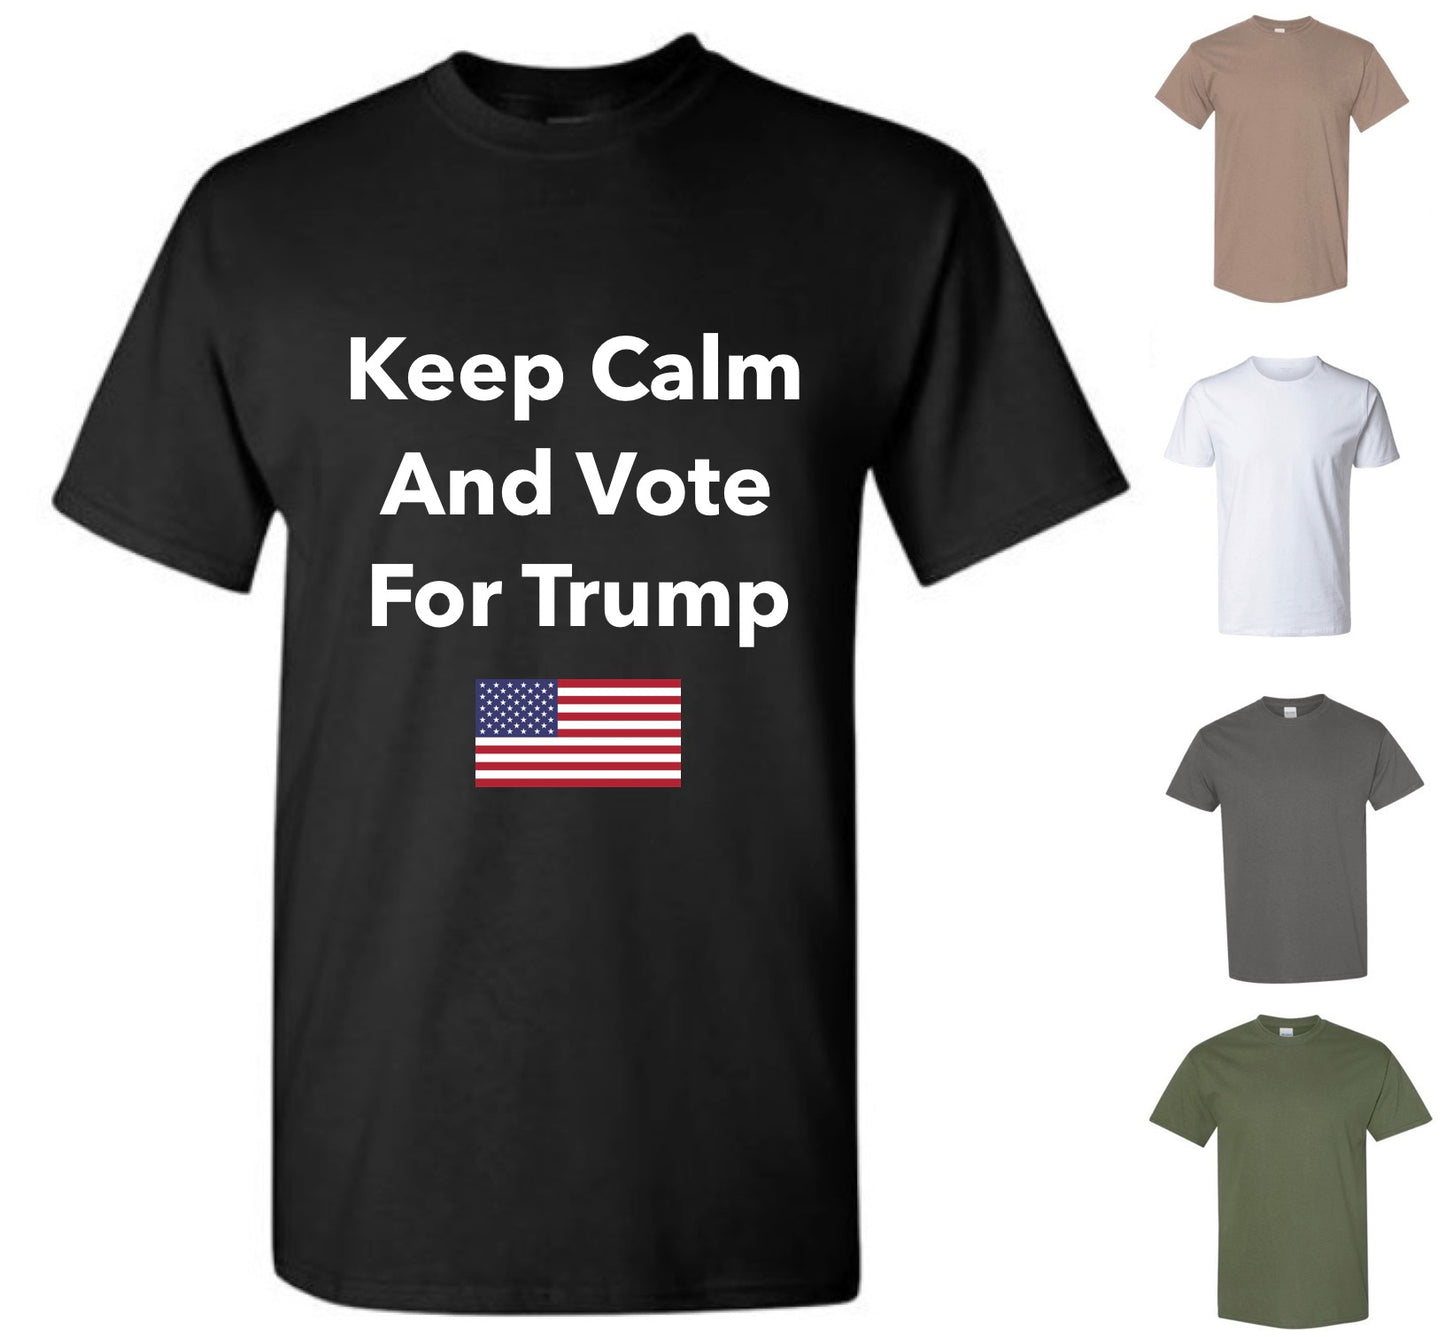 Keep Calm And Vote For Trump T-Shirt — Free Shipping!